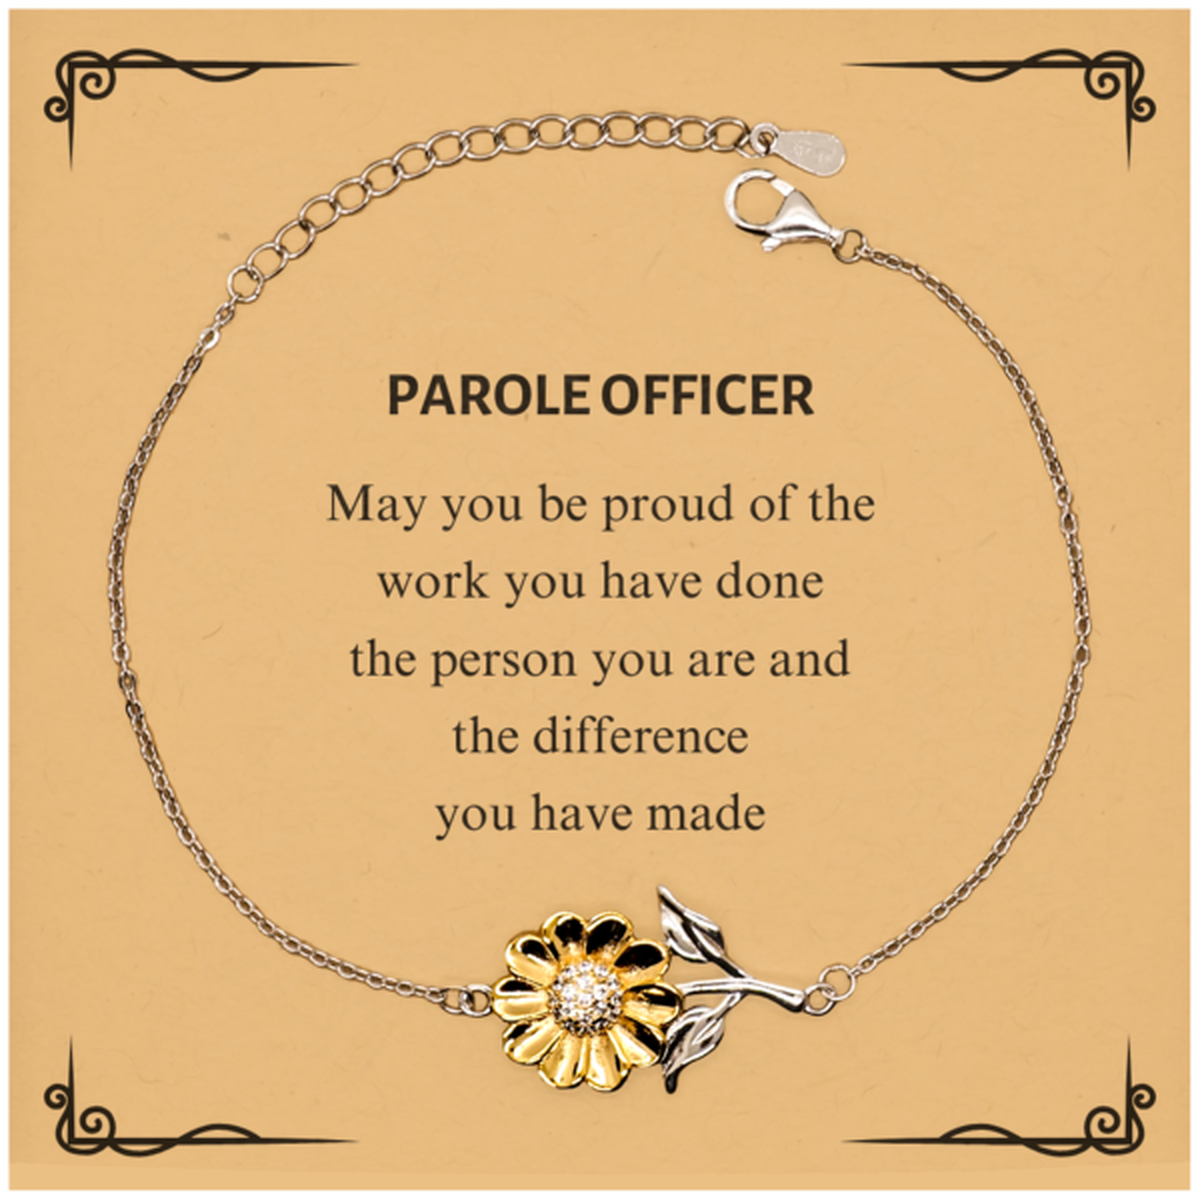 Parole Officer May you be proud of the work you have done, Retirement Parole Officer Sunflower Bracelet for Colleague Appreciation Gifts Amazing for Parole Officer